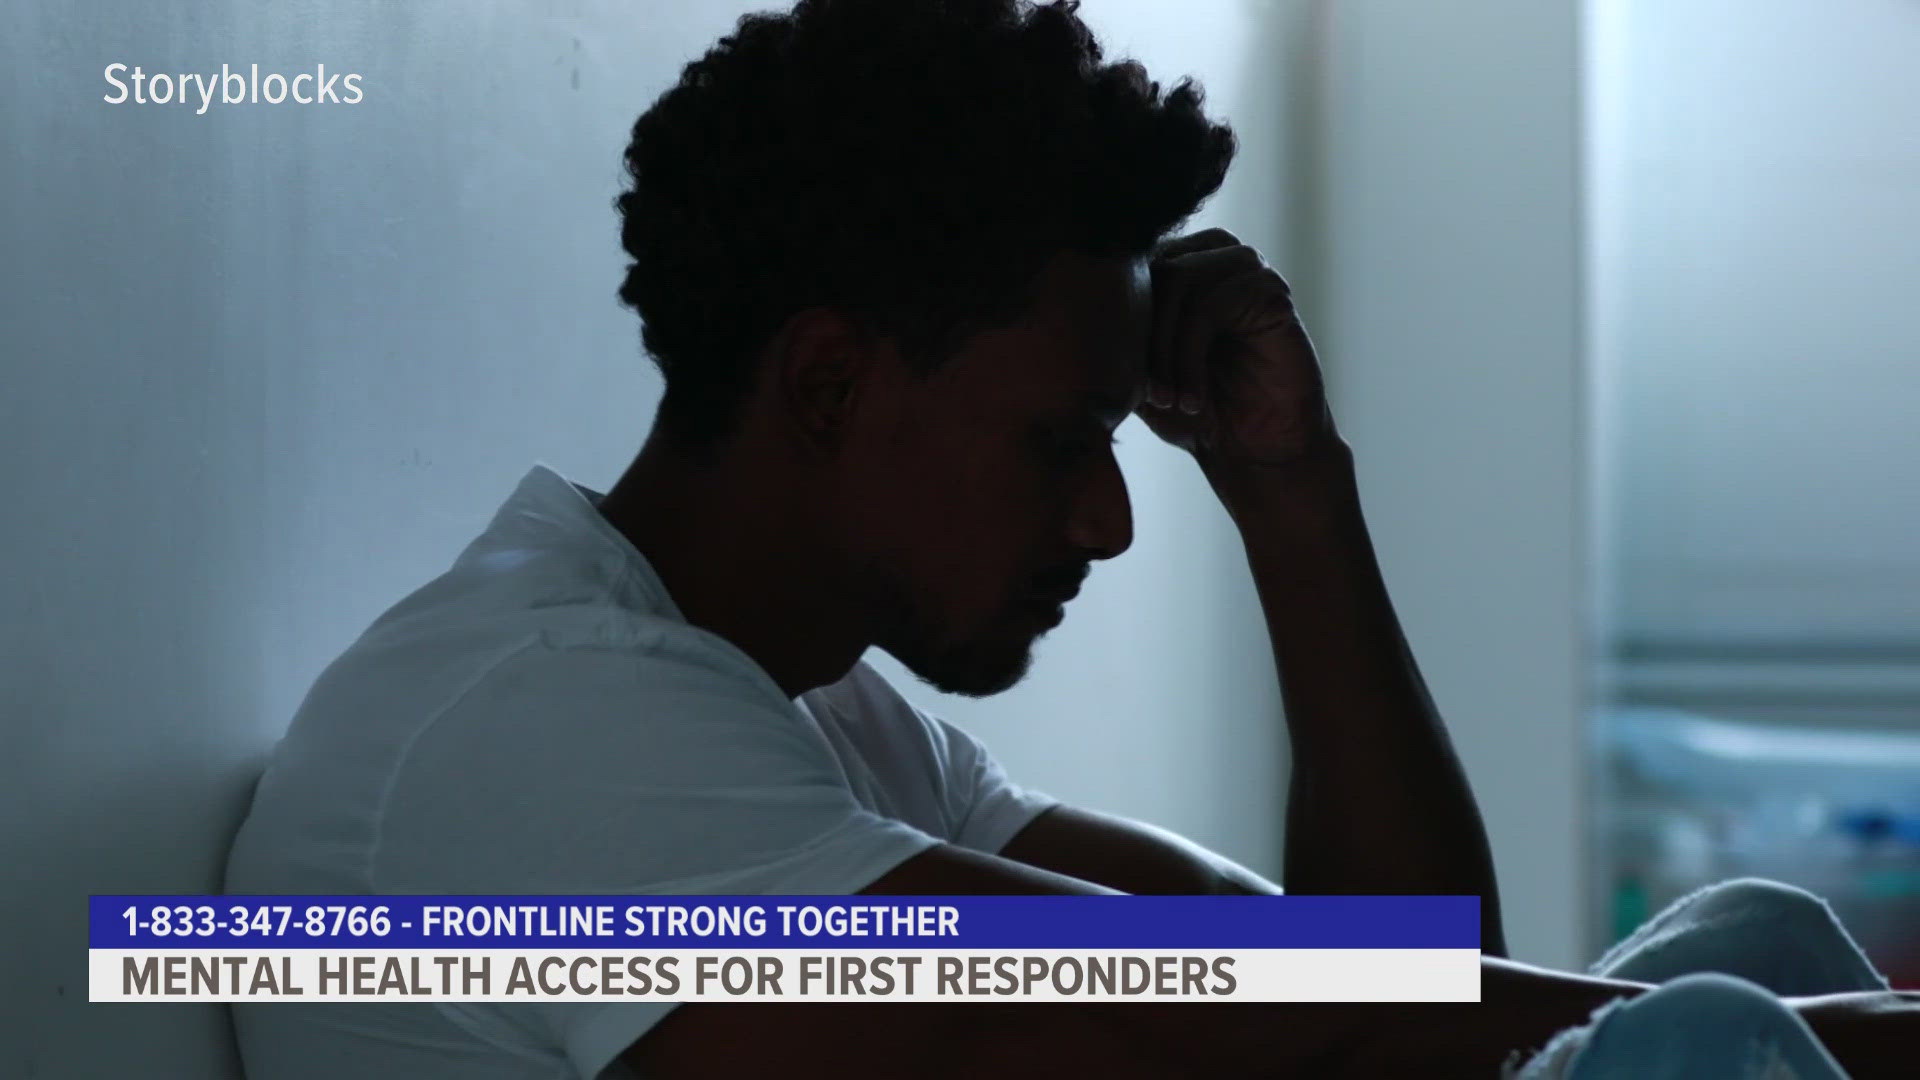 Mental health resources for first responders are being seen as increasingly vital.